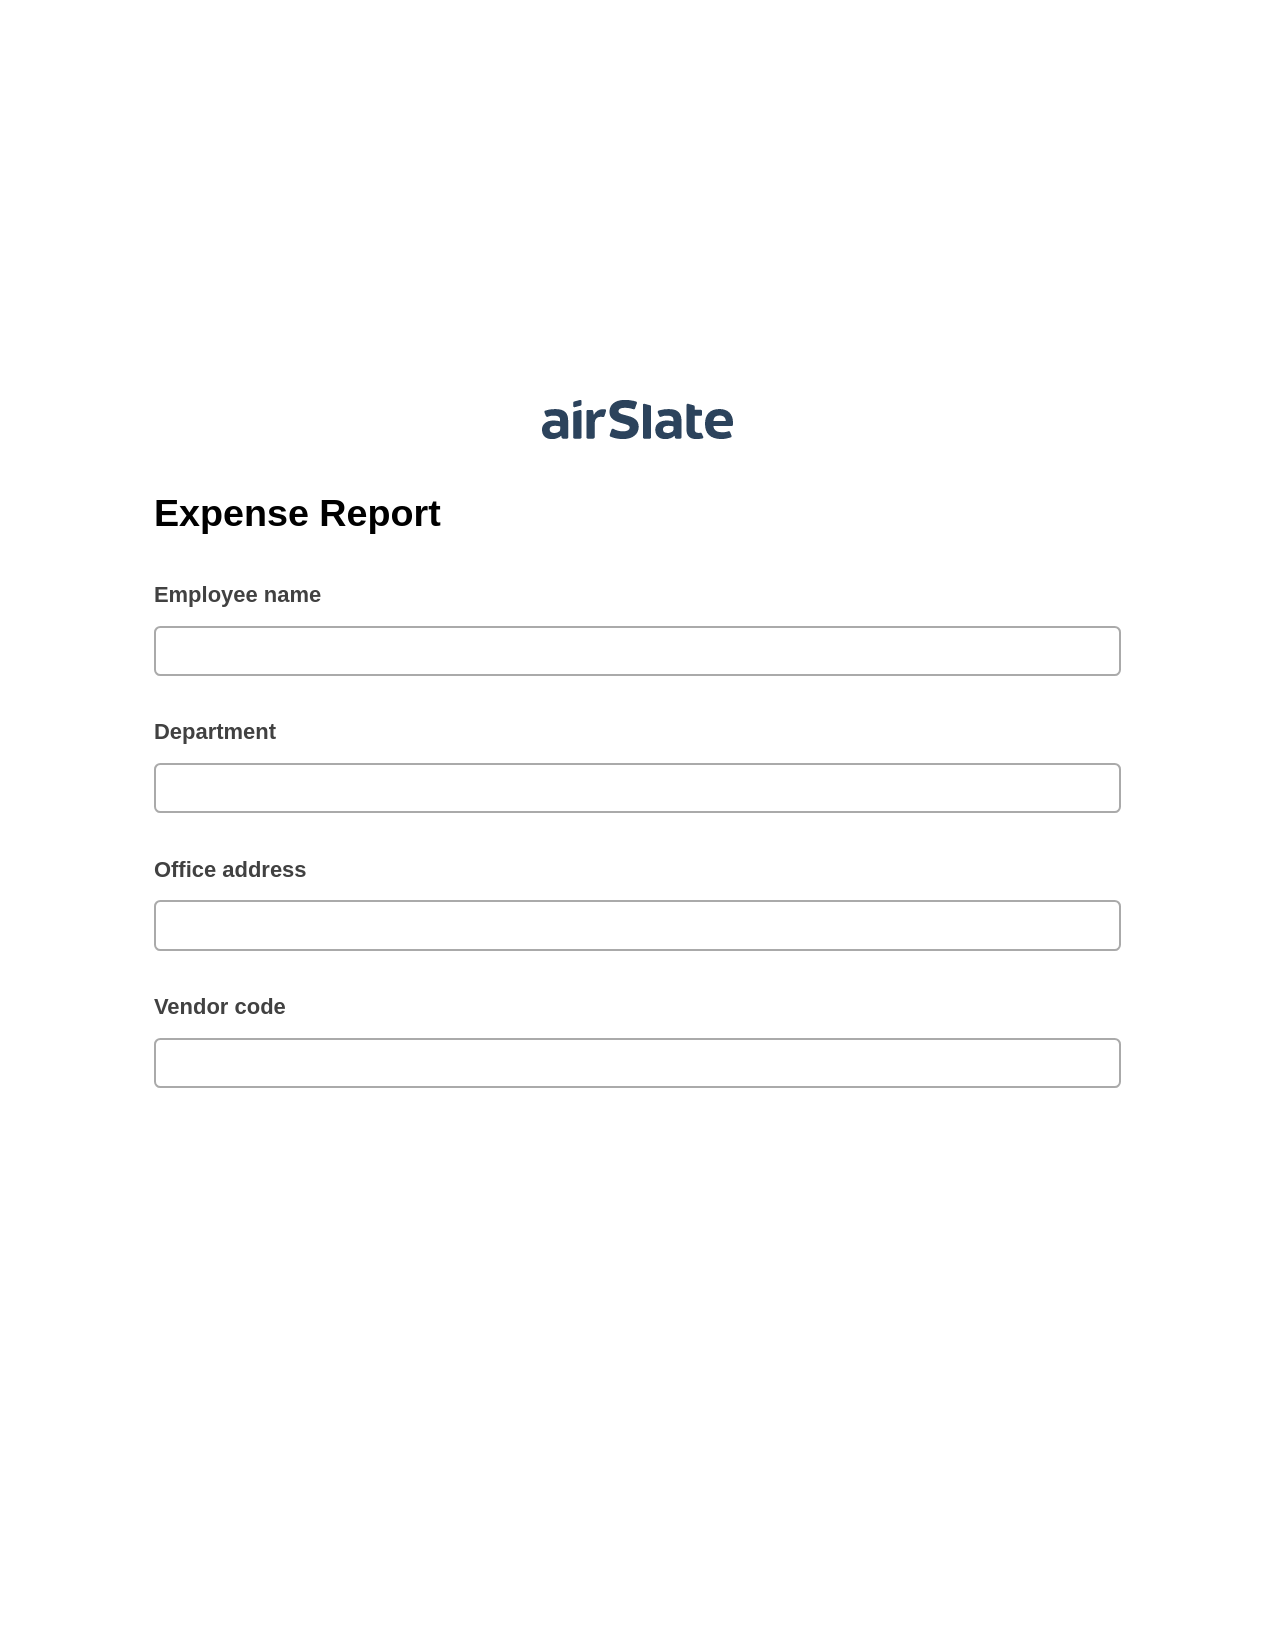 Expense Report Pre-fill from CSV File Bot, Create Salesforce Record Bot, Export to Excel 365 Bot